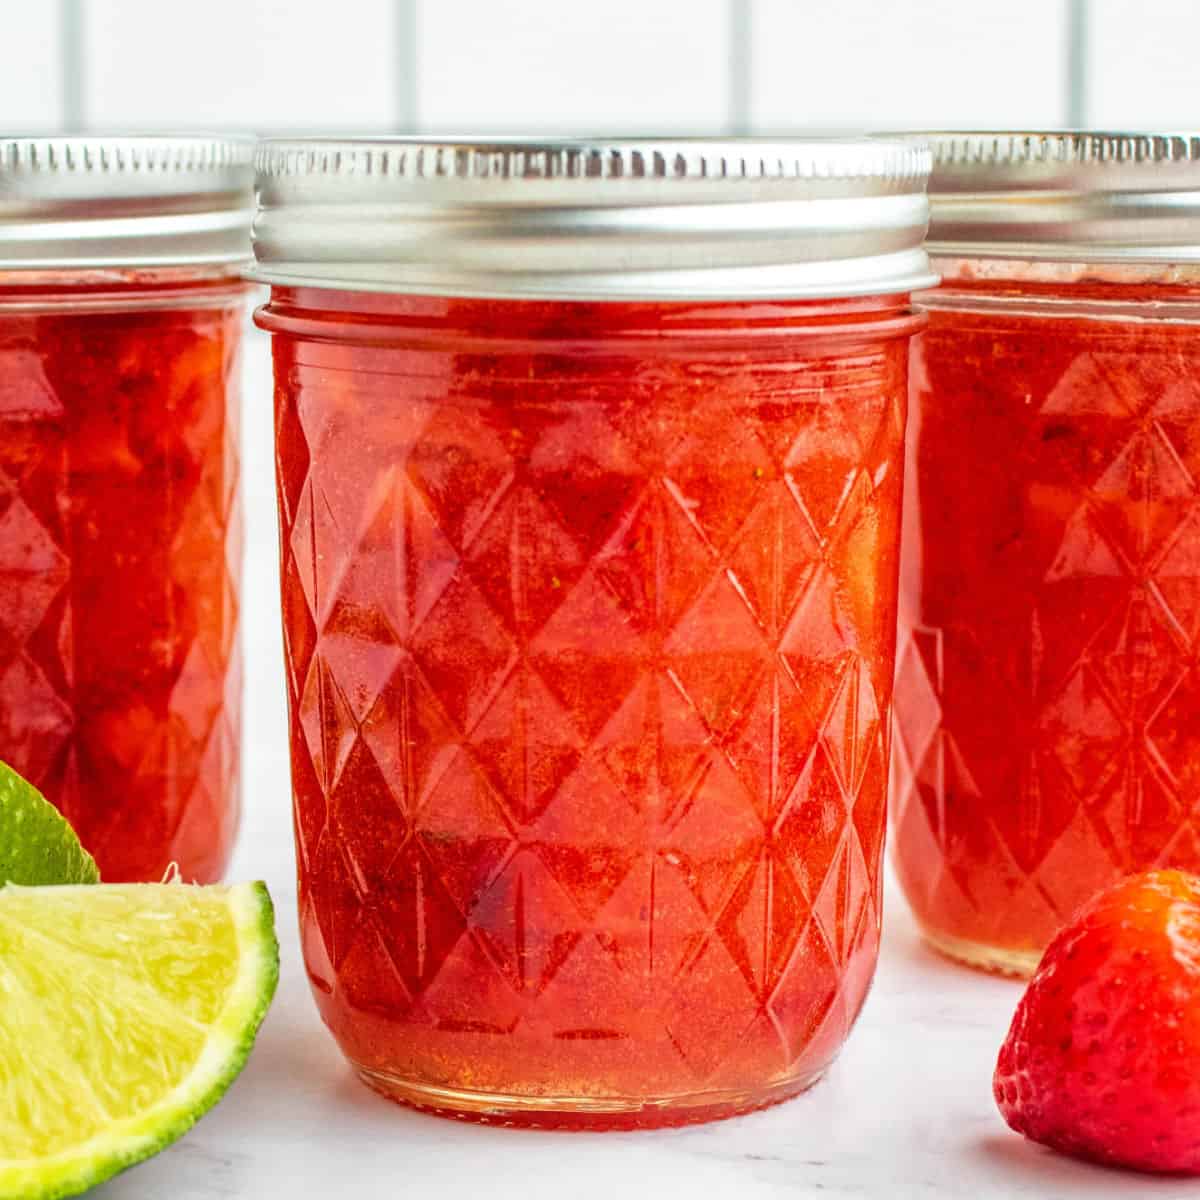 square image of jars of strawberry freezer jam next to limes and strawberries